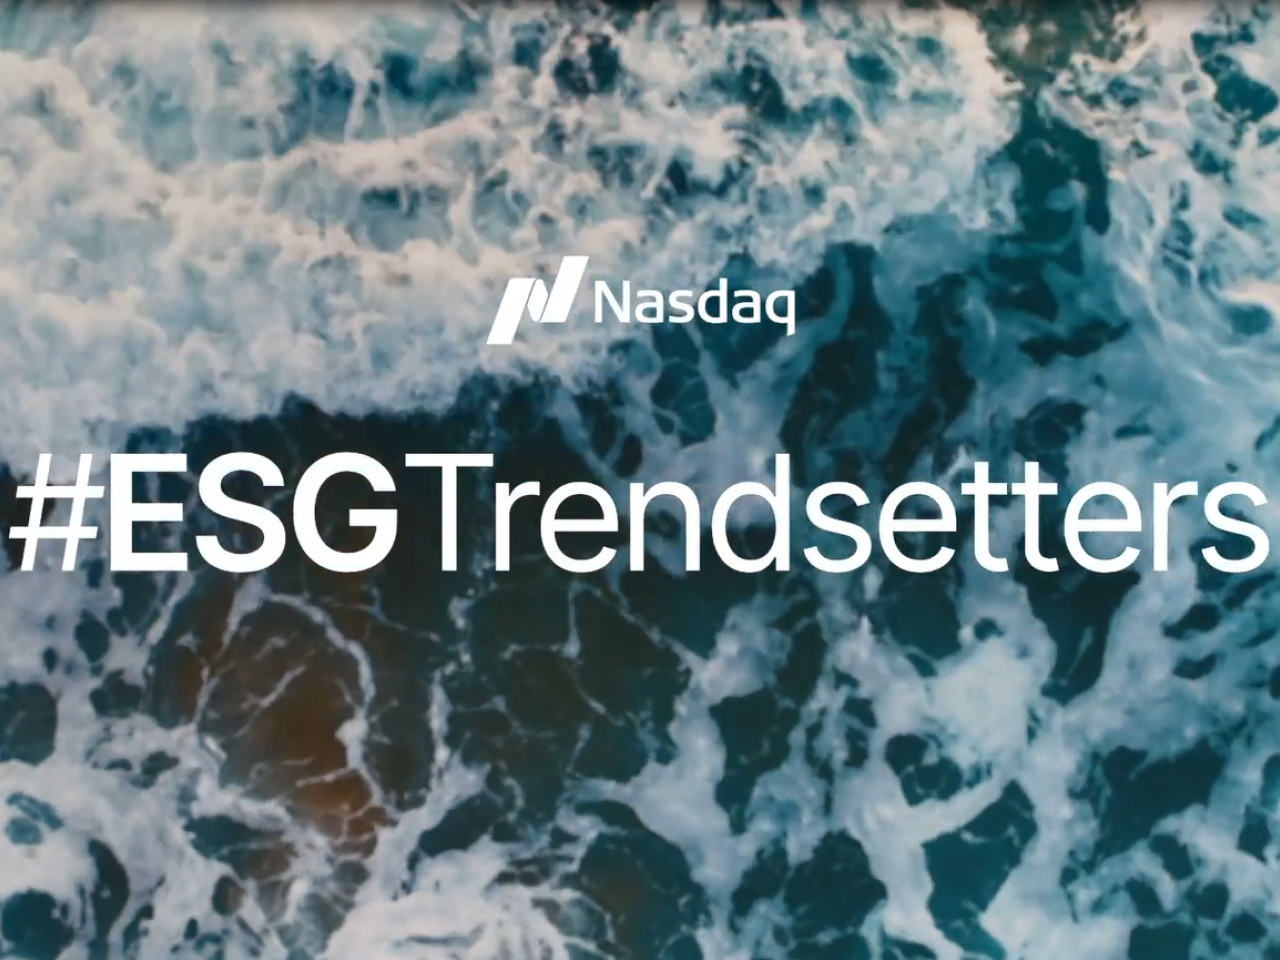 Nasdaq logo and "#ESG Trendsetters" over a background of crashing waves on a beach.